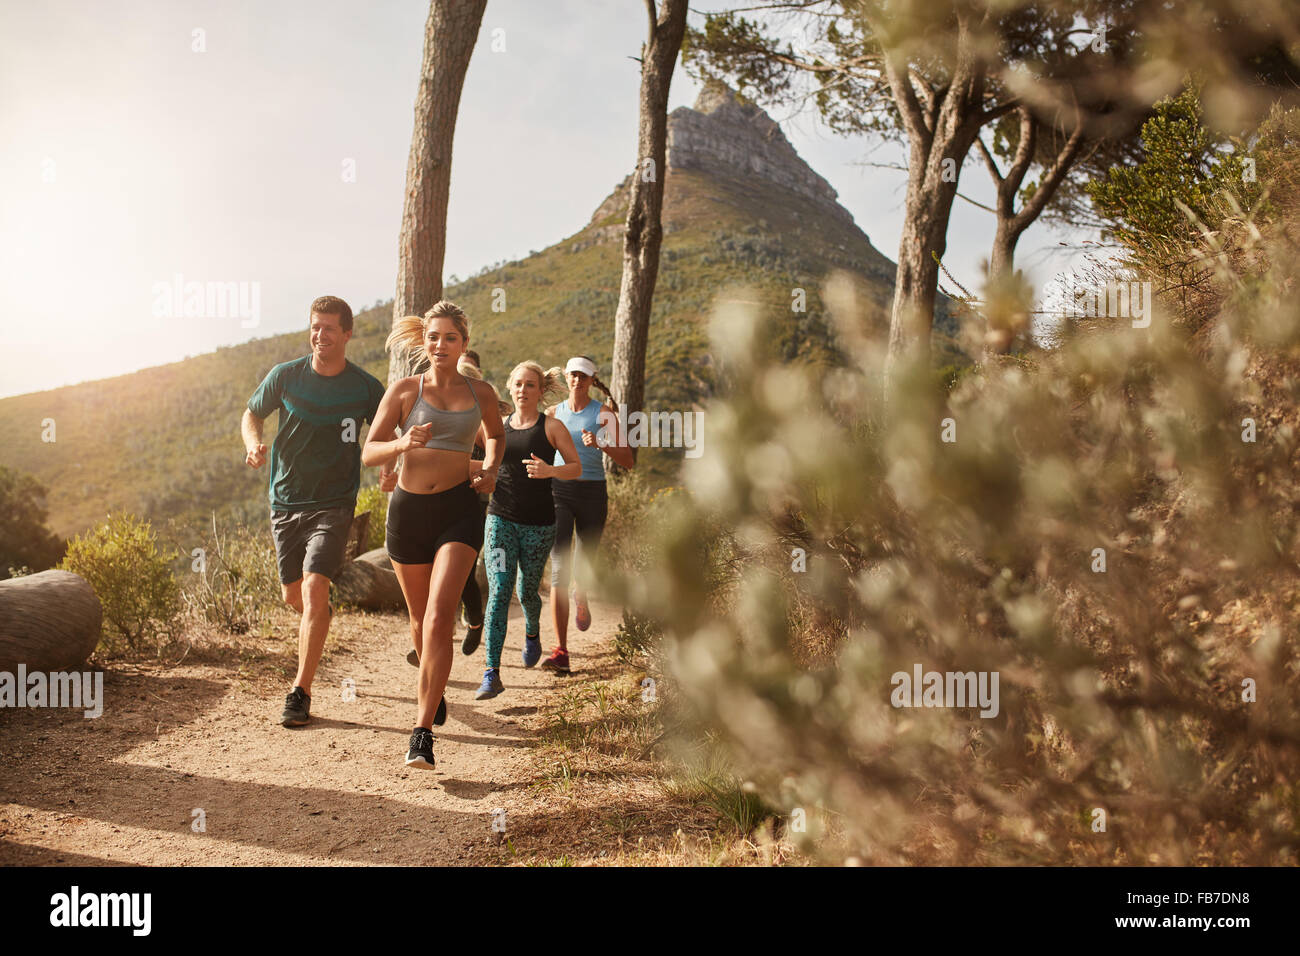 Group of young adults training and running together through trails on the hillside outdoors in nature. Fit young people trail ru Stock Photo